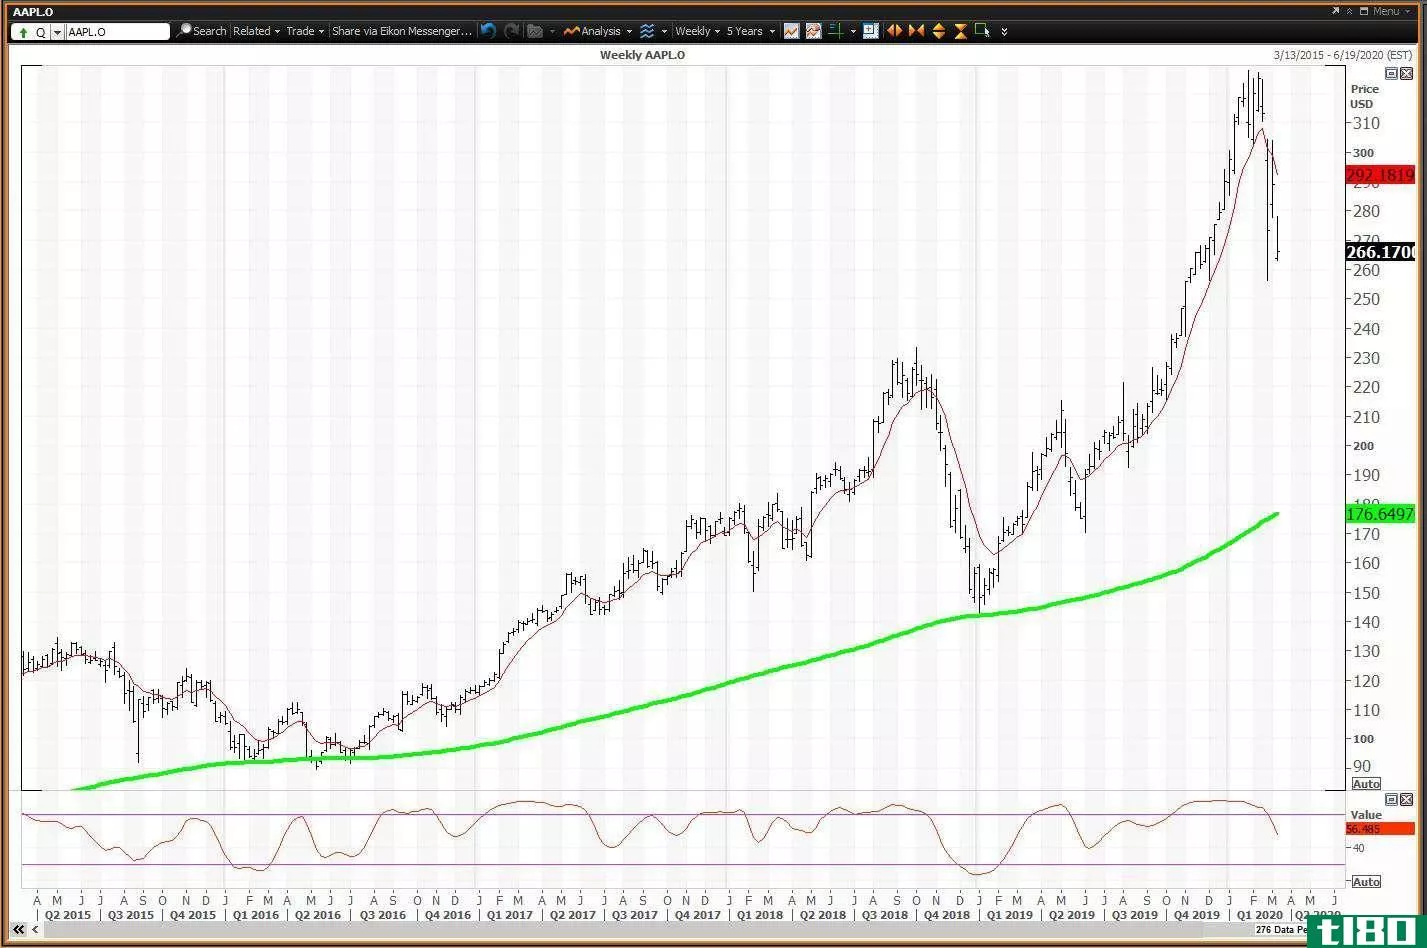 Weekly chart showing the share price performance of Apple Inc. (AAPL)